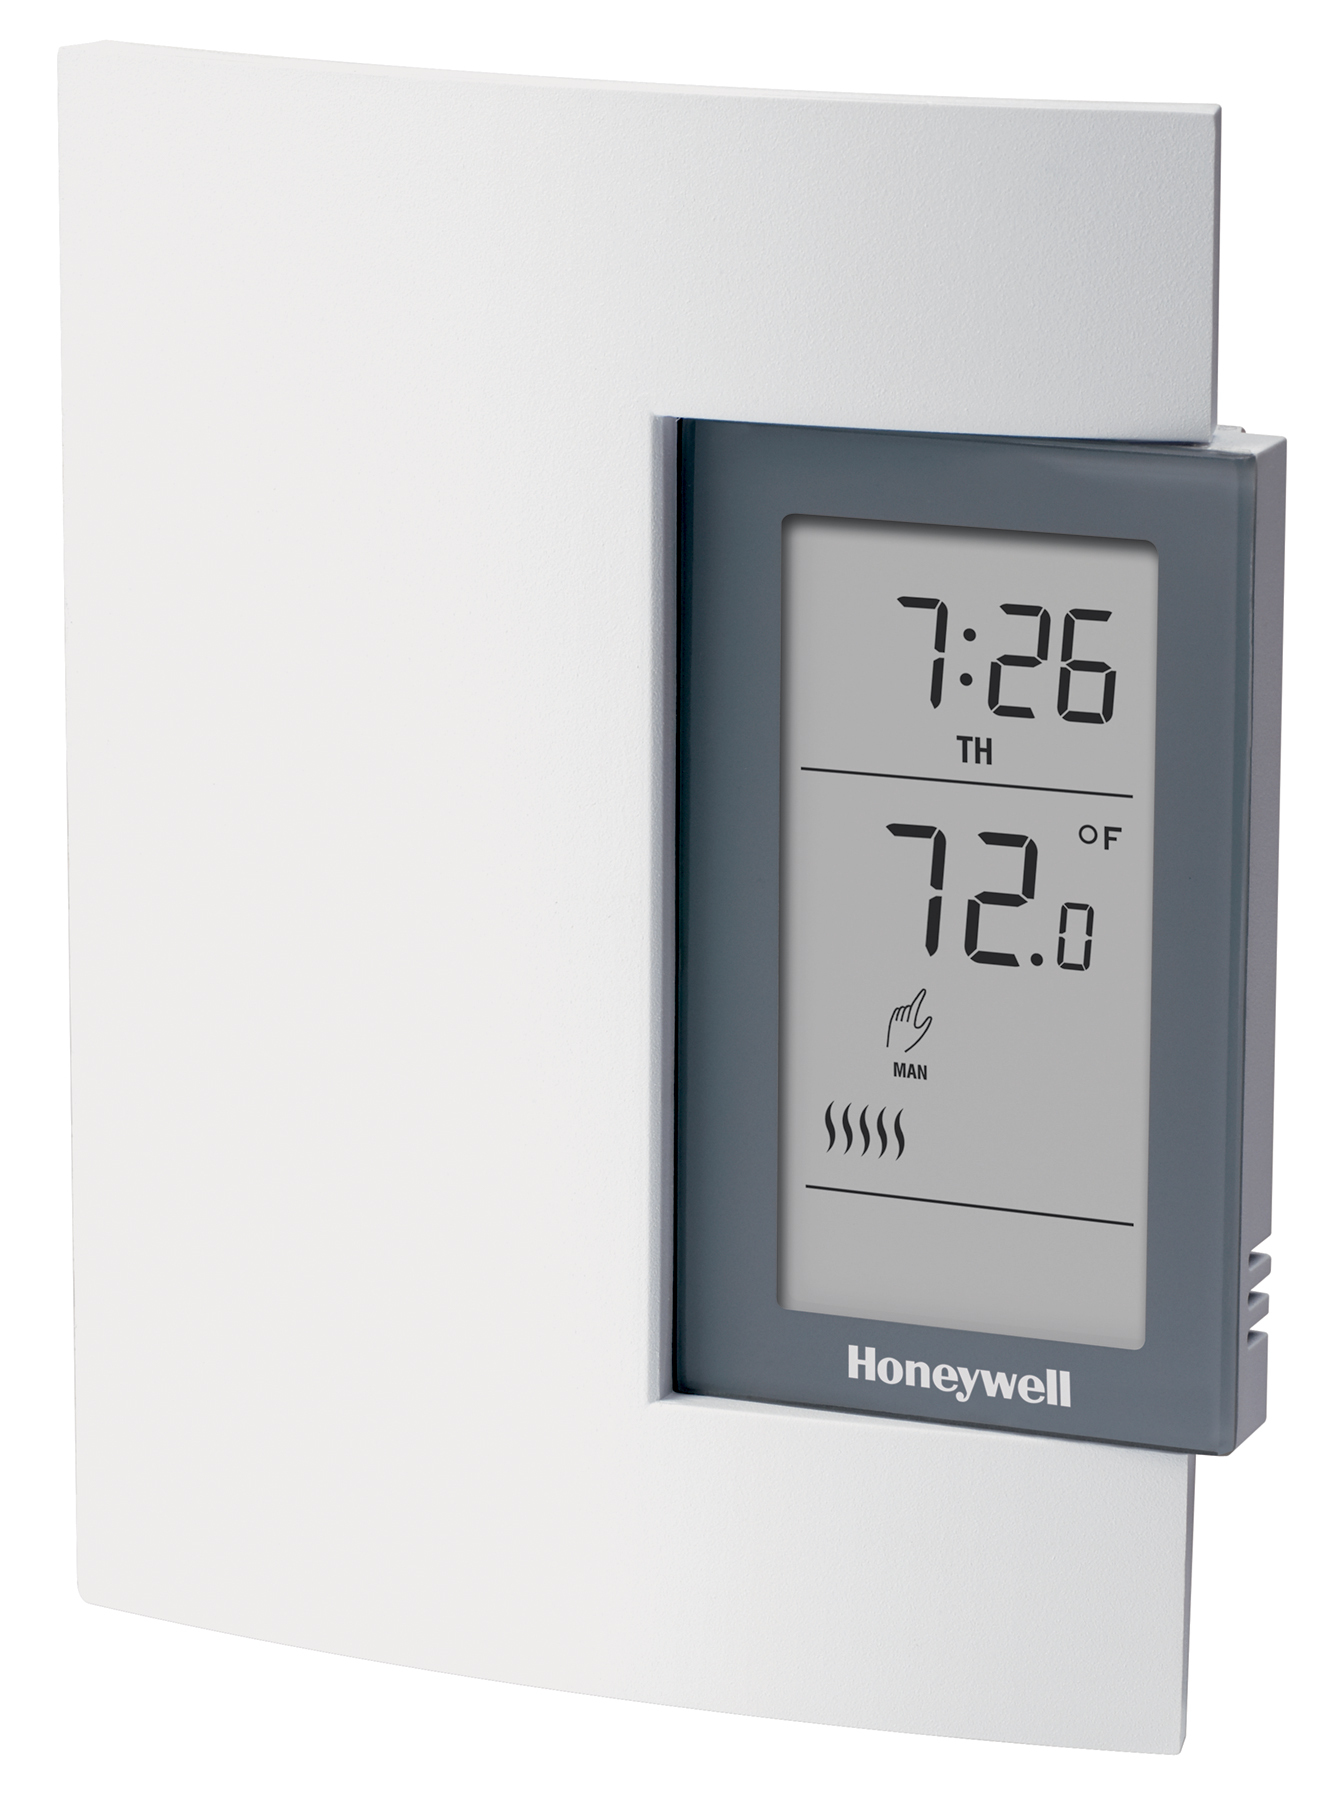 7-Day Programmable Hydronic Thermostat (TL8100)